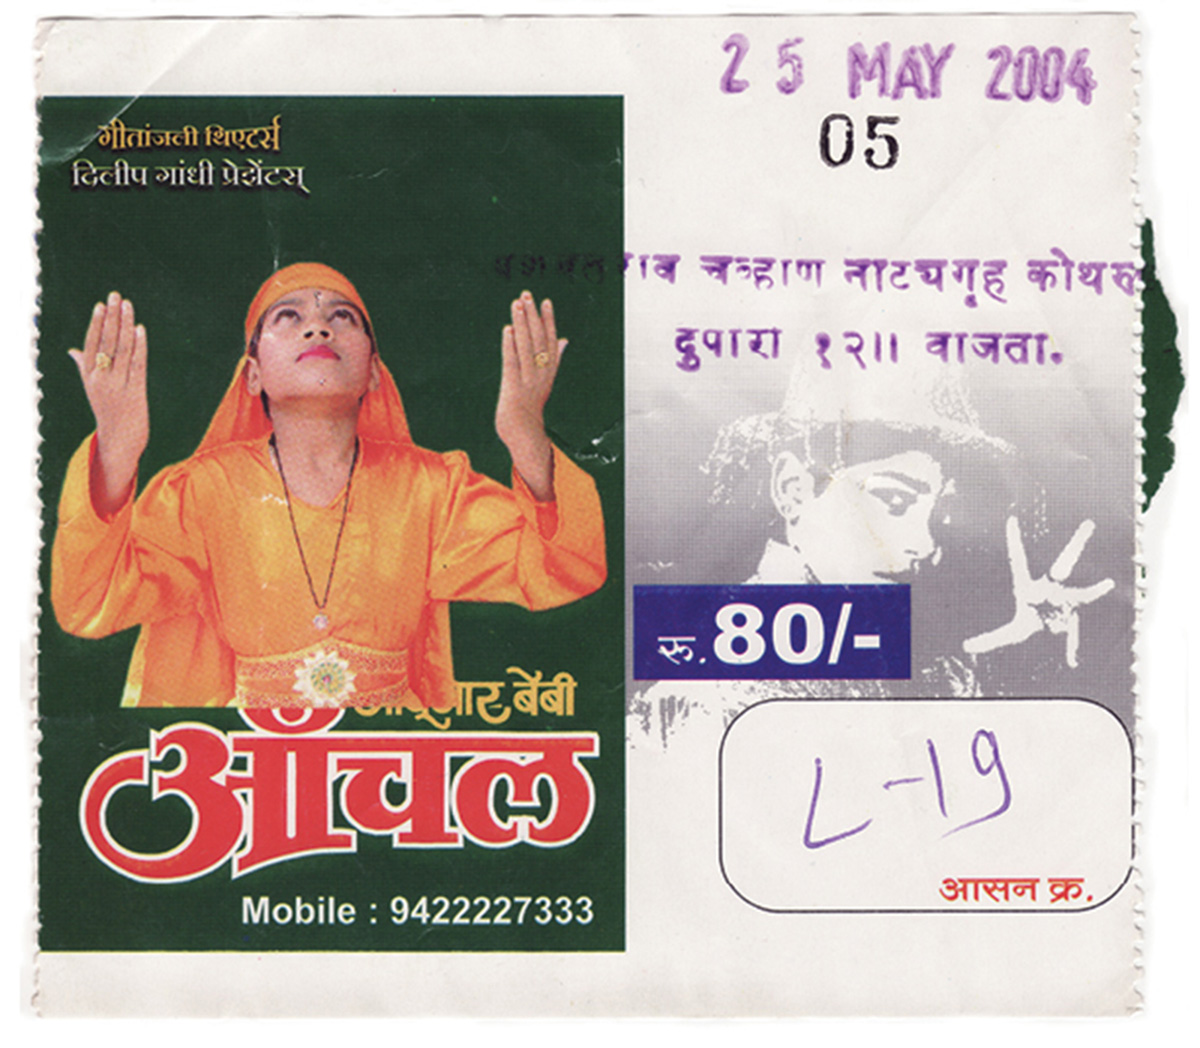 A ticket stub from a 2004 performance
by Baby Anchal in a suburb of Pune.